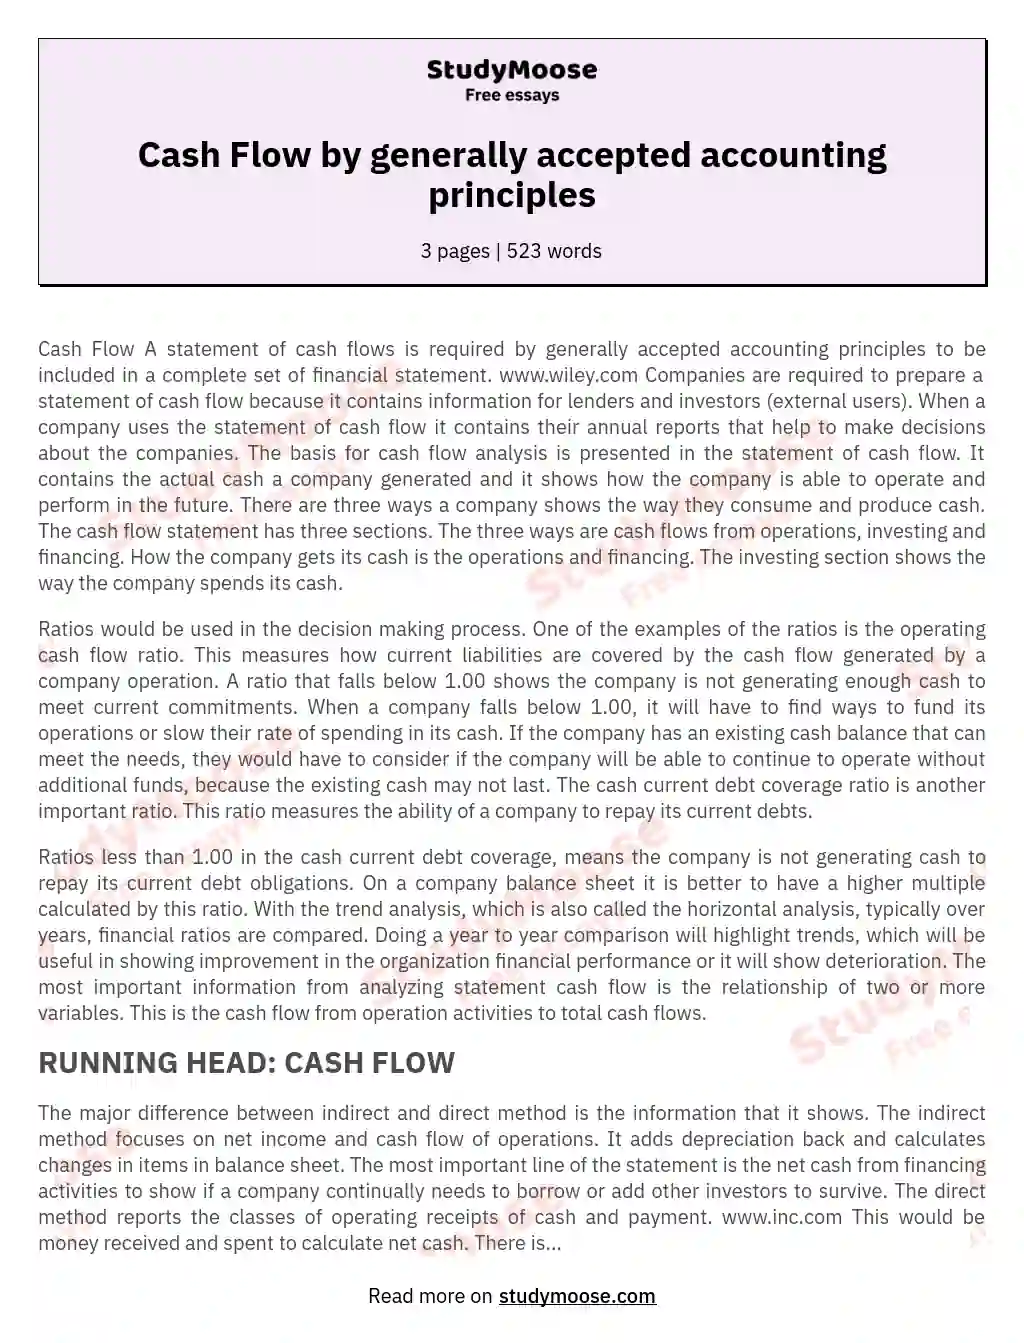 Cash Flow by generally accepted accounting principles